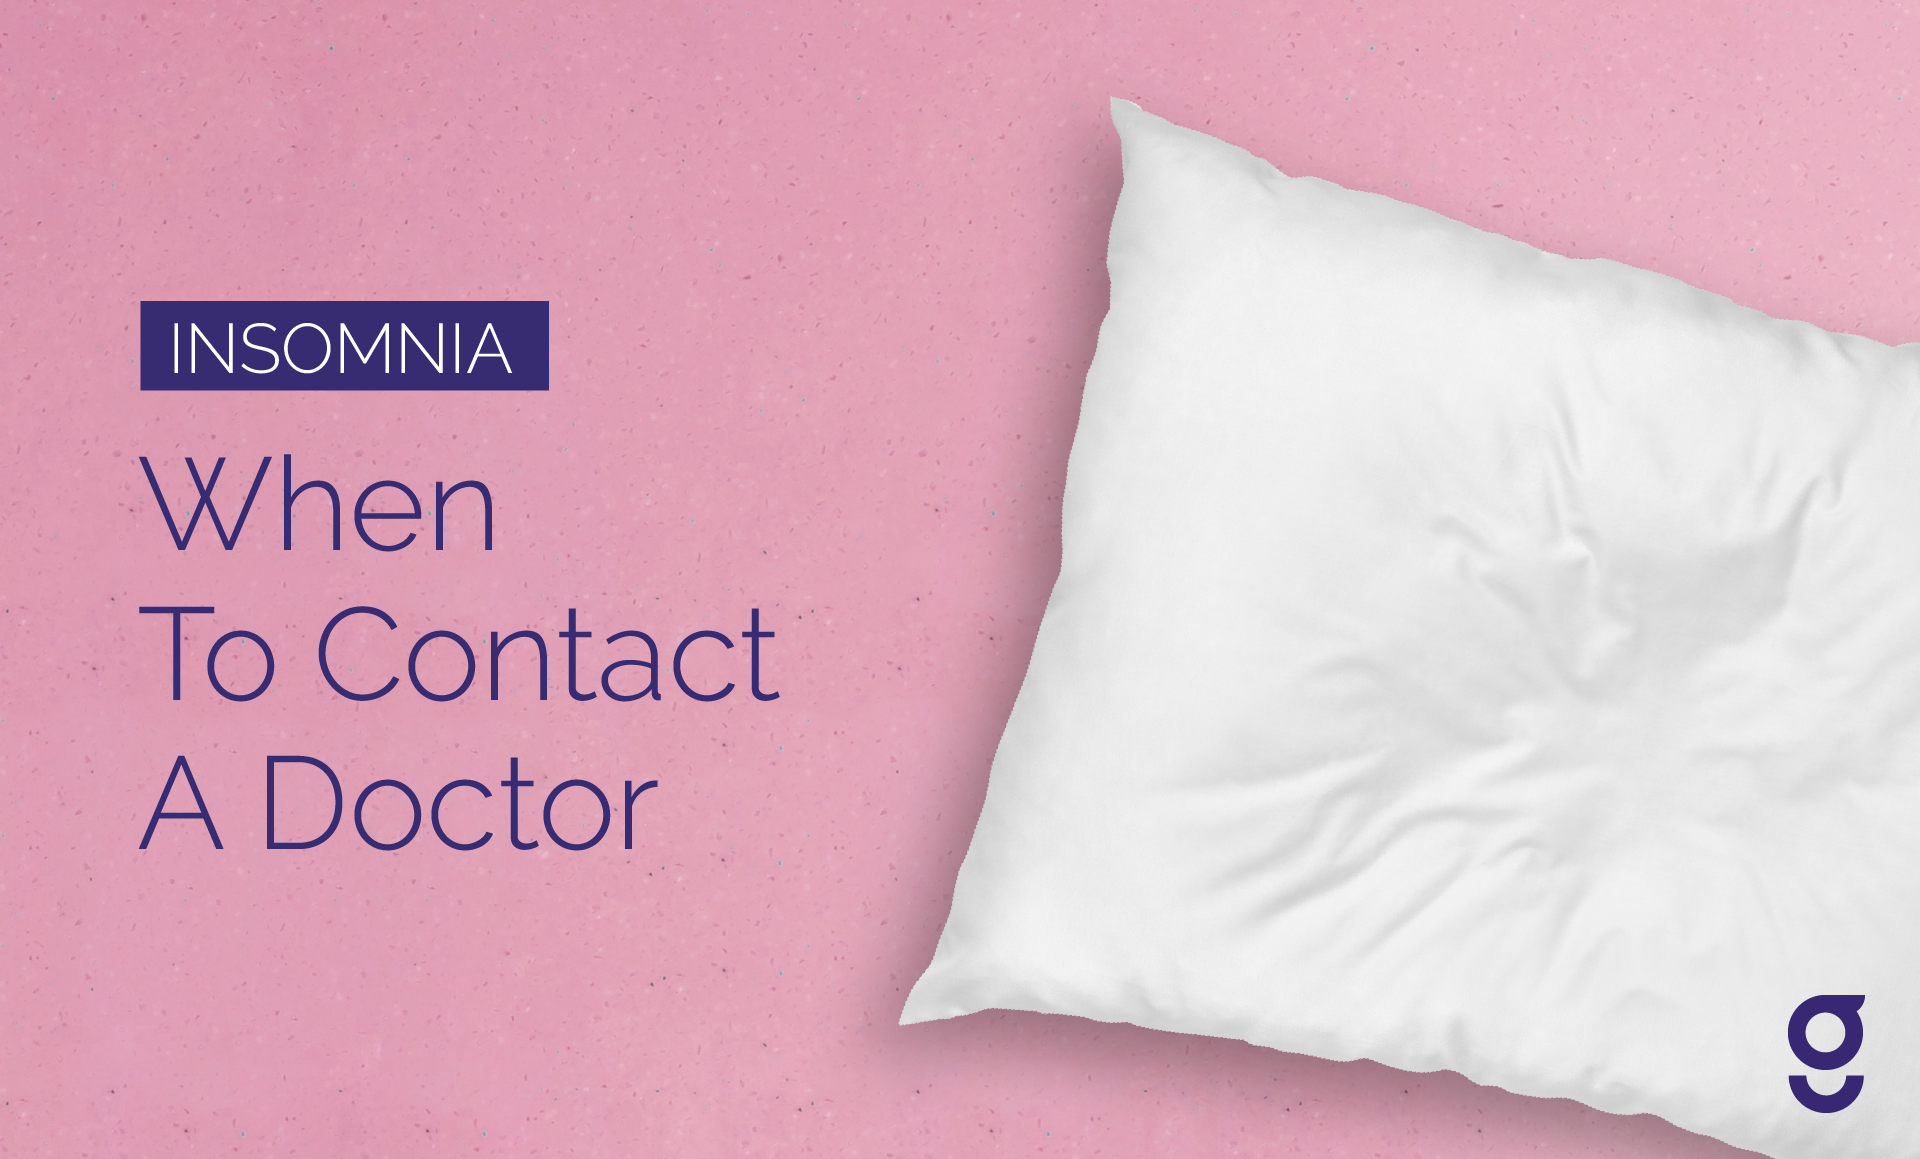 Sleep Problems: When to Contact Your Doctor